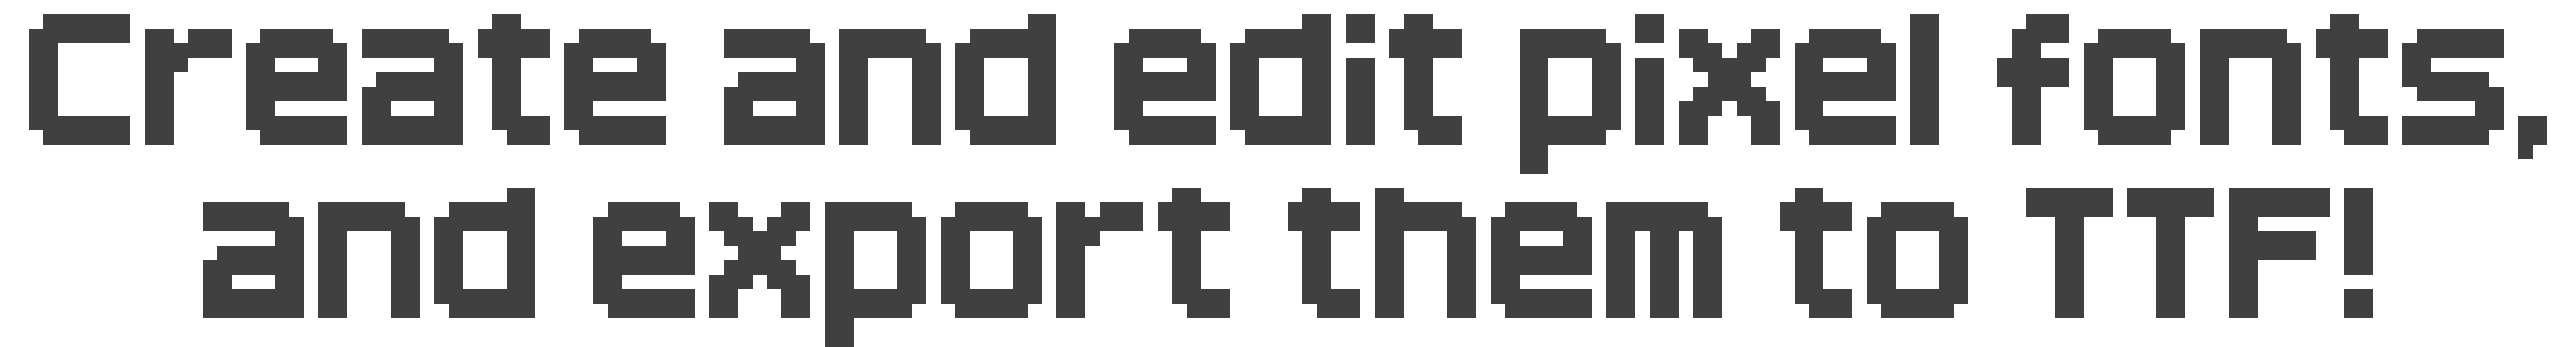 Create and edit pixel fonts, and export them to TTF!